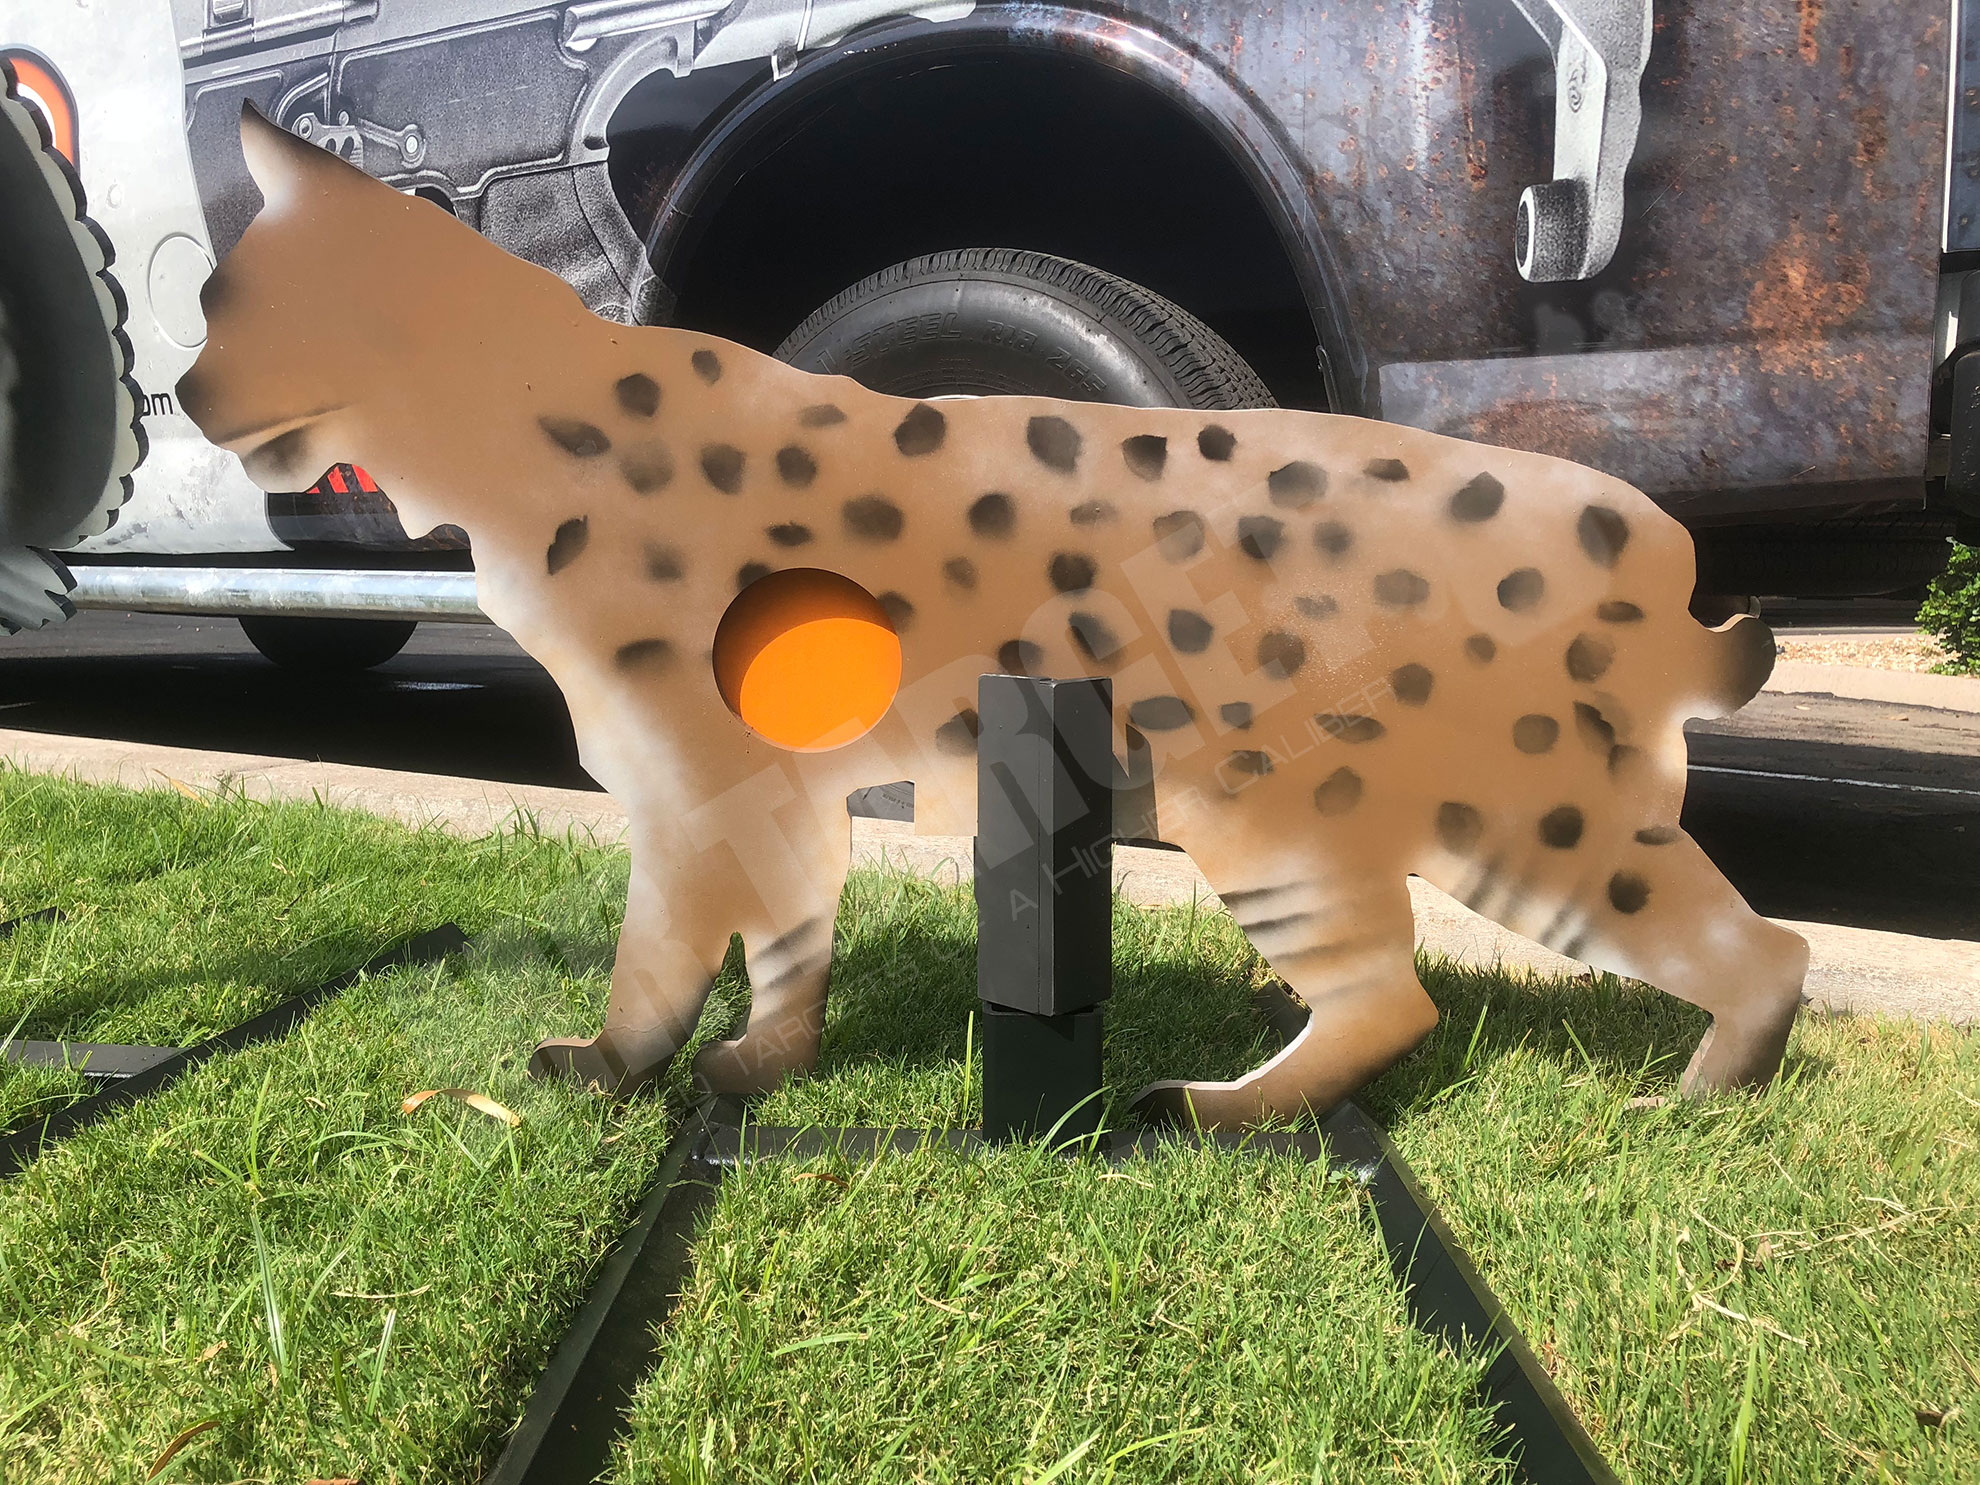 BOBCAT - reactive animal hunting target with vitals - by MR TARGET